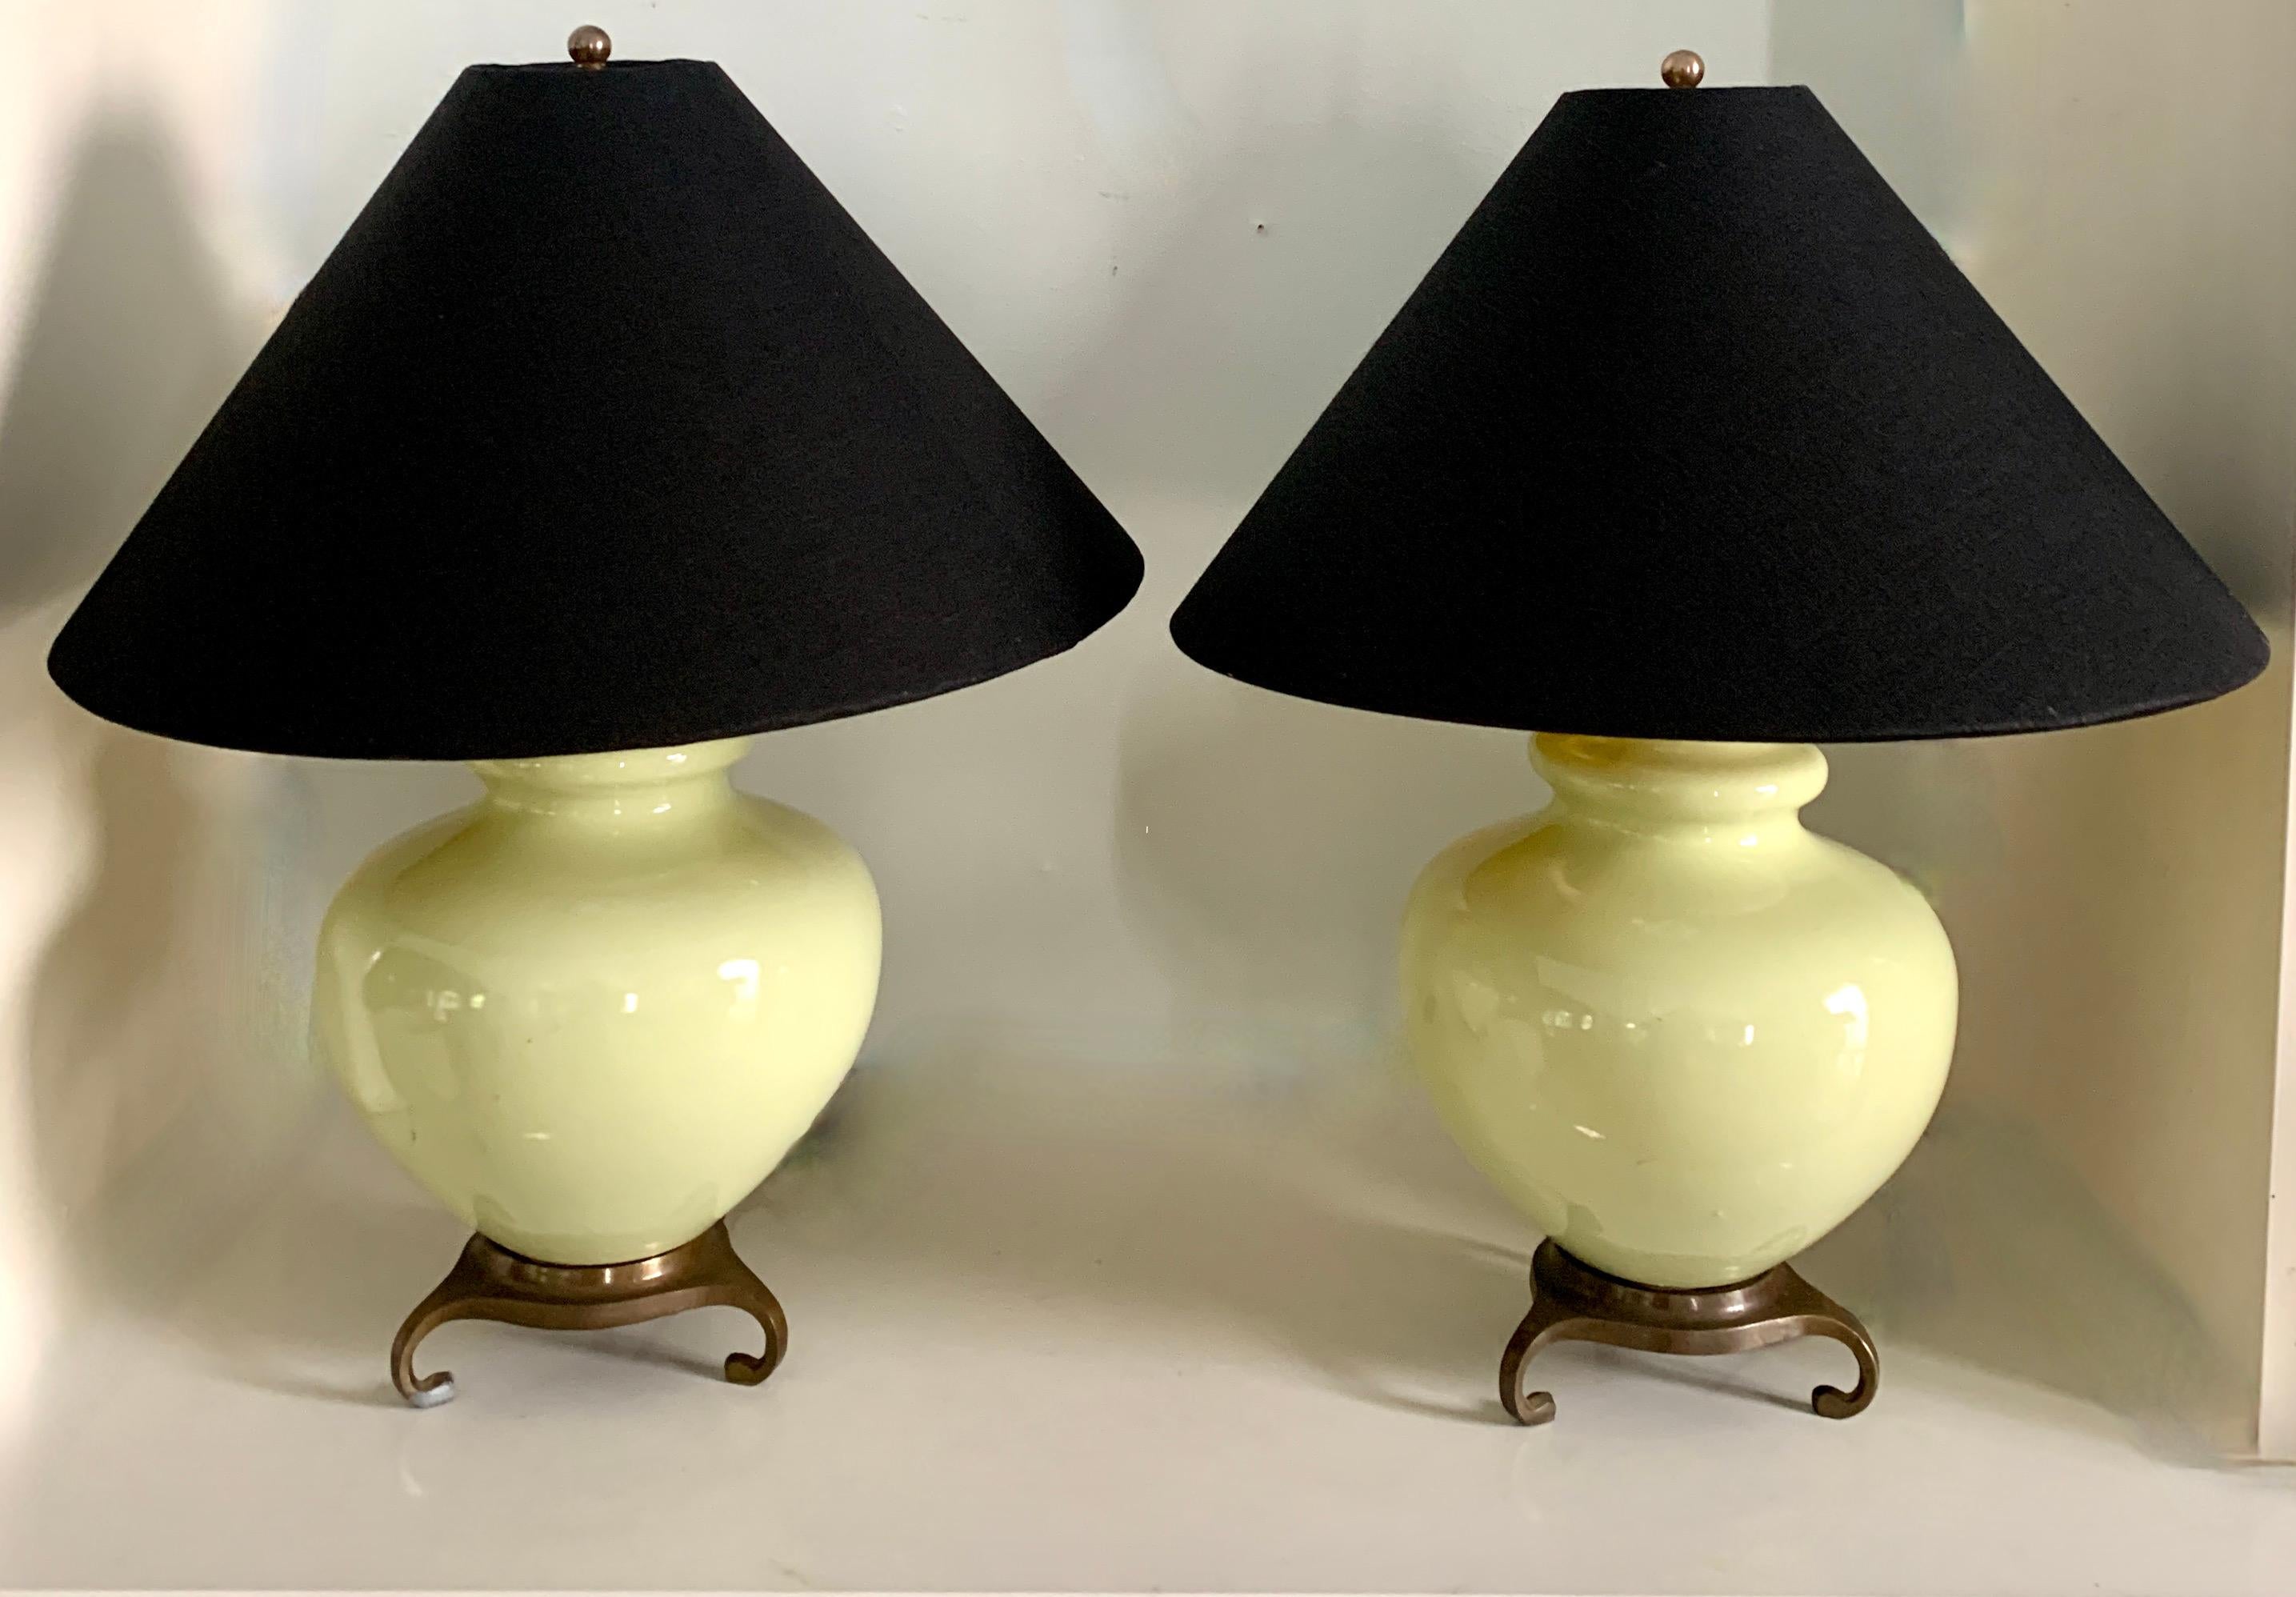 A pair of very light mint green lamps with Asian style Brass bases. The lamps have new custom linen shades with gold foil interiors. A compliment to many interiors - the size and style work well in a living or bedroom and the foil interiors creates